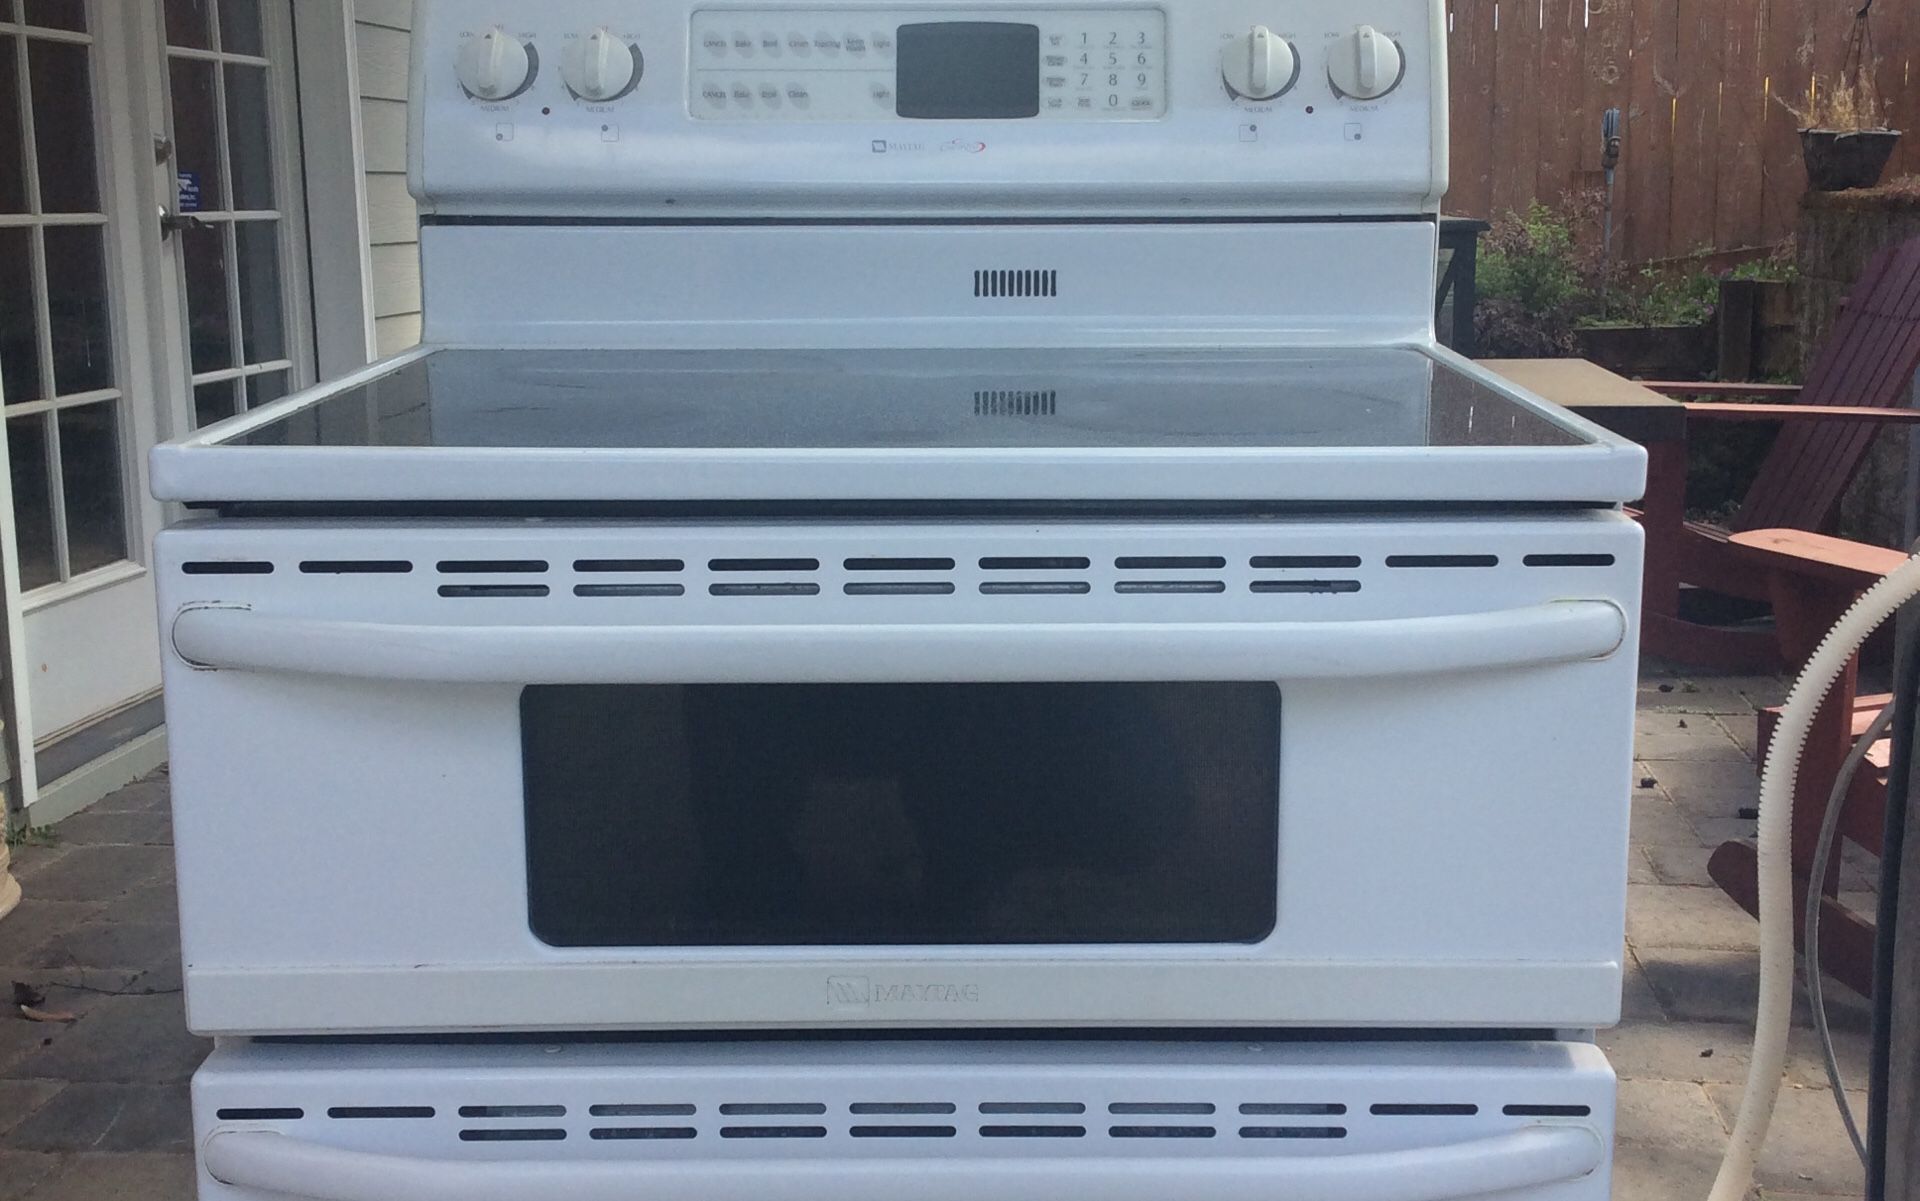 Maytag Gemini White double oven stove and electric cook top